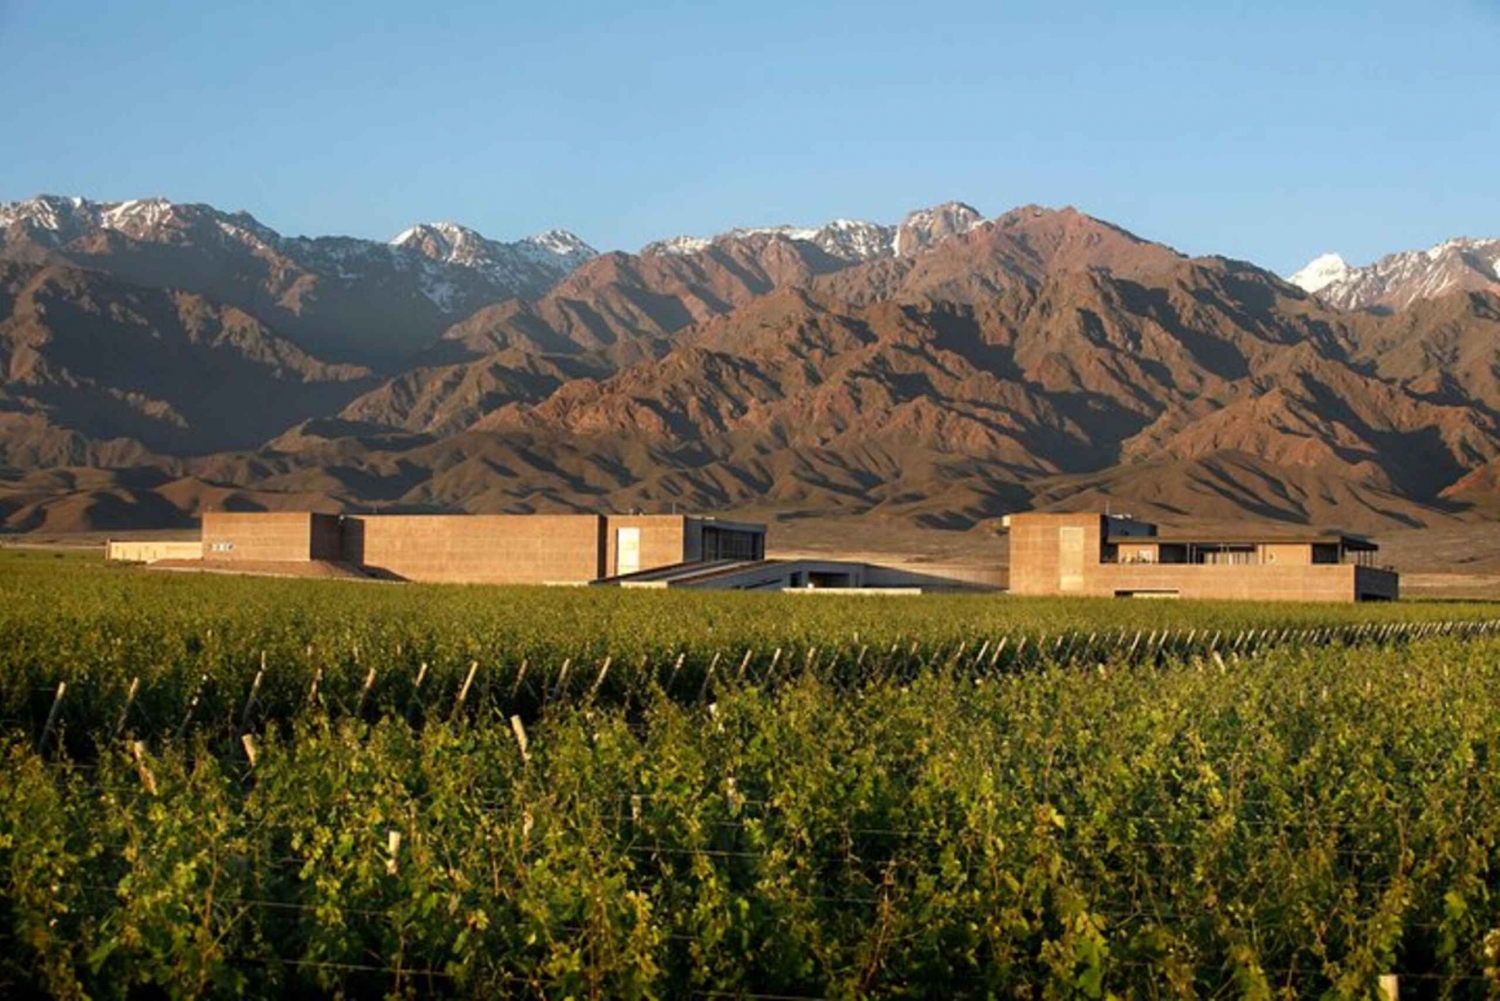 Buenos Aires: Mendoza Winery Day Trip with Lunch and Flights